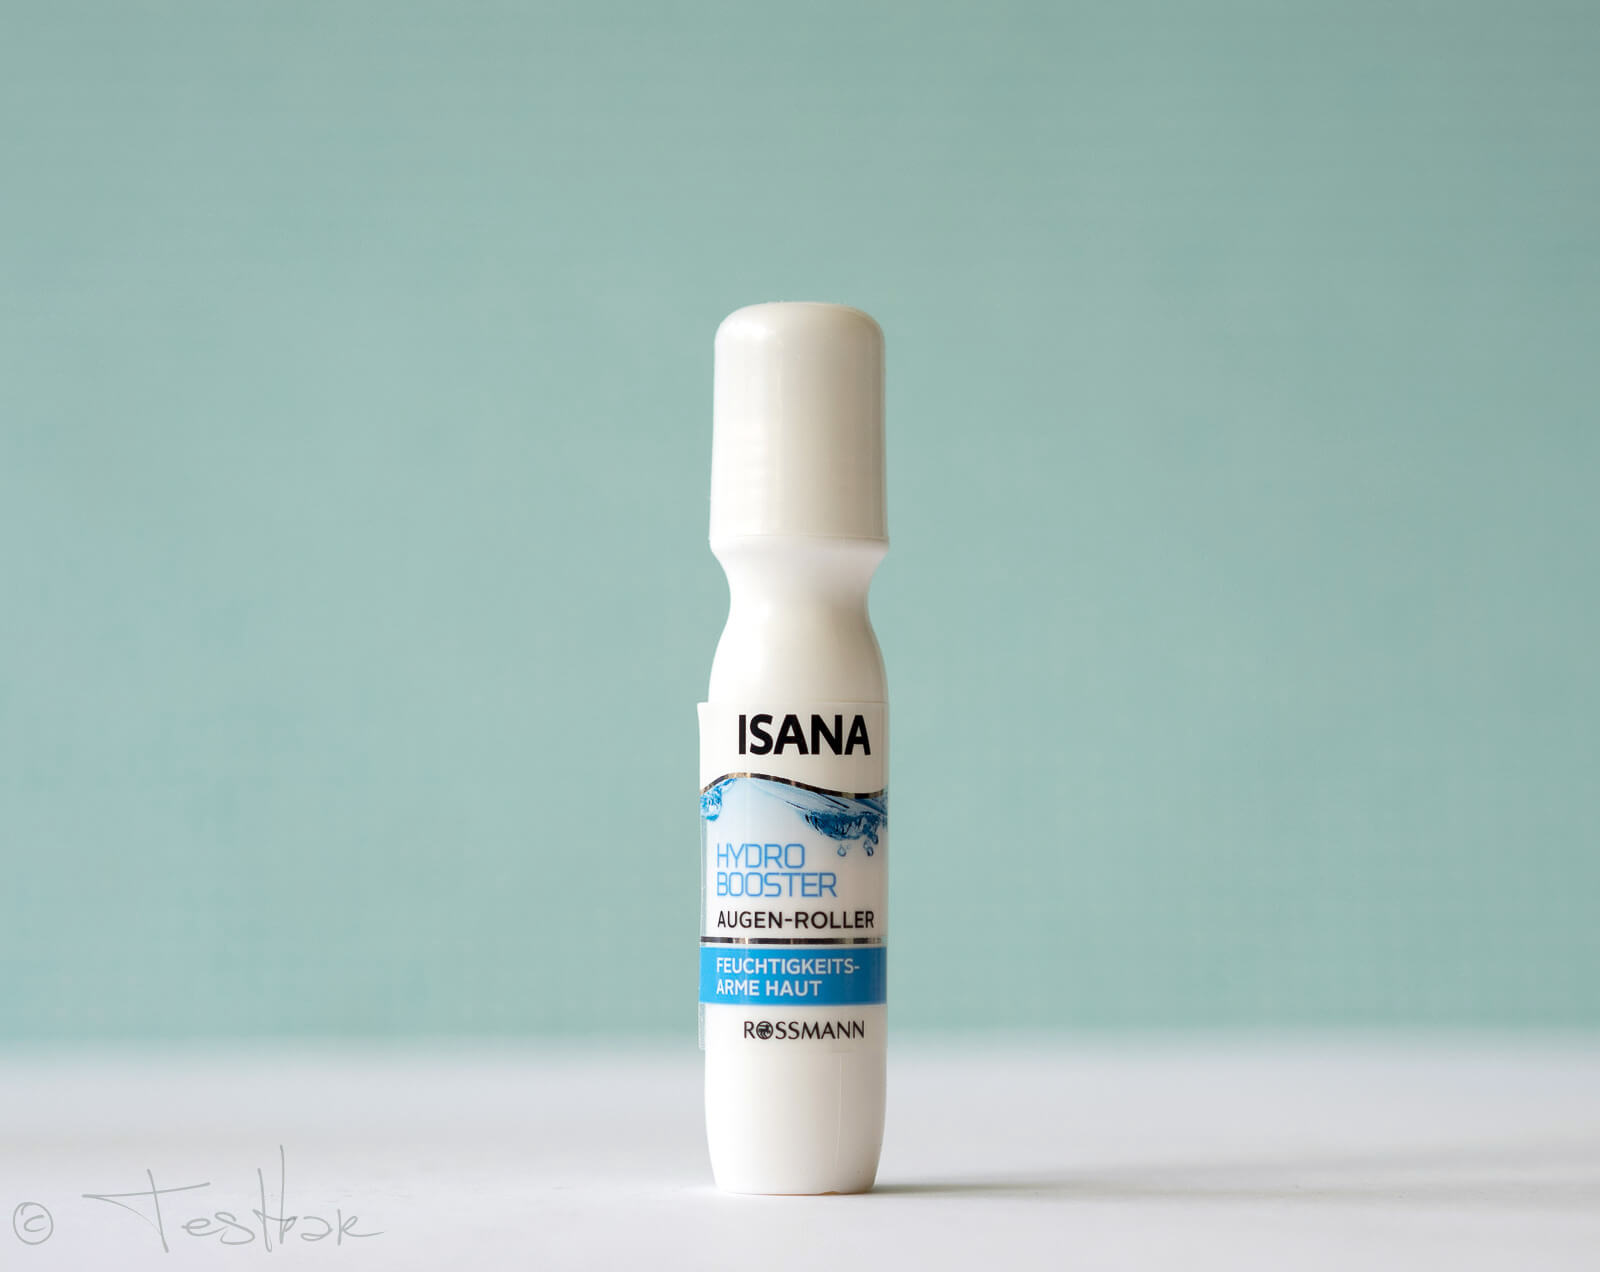 ISANA - Hydro Booster Augen-Roller